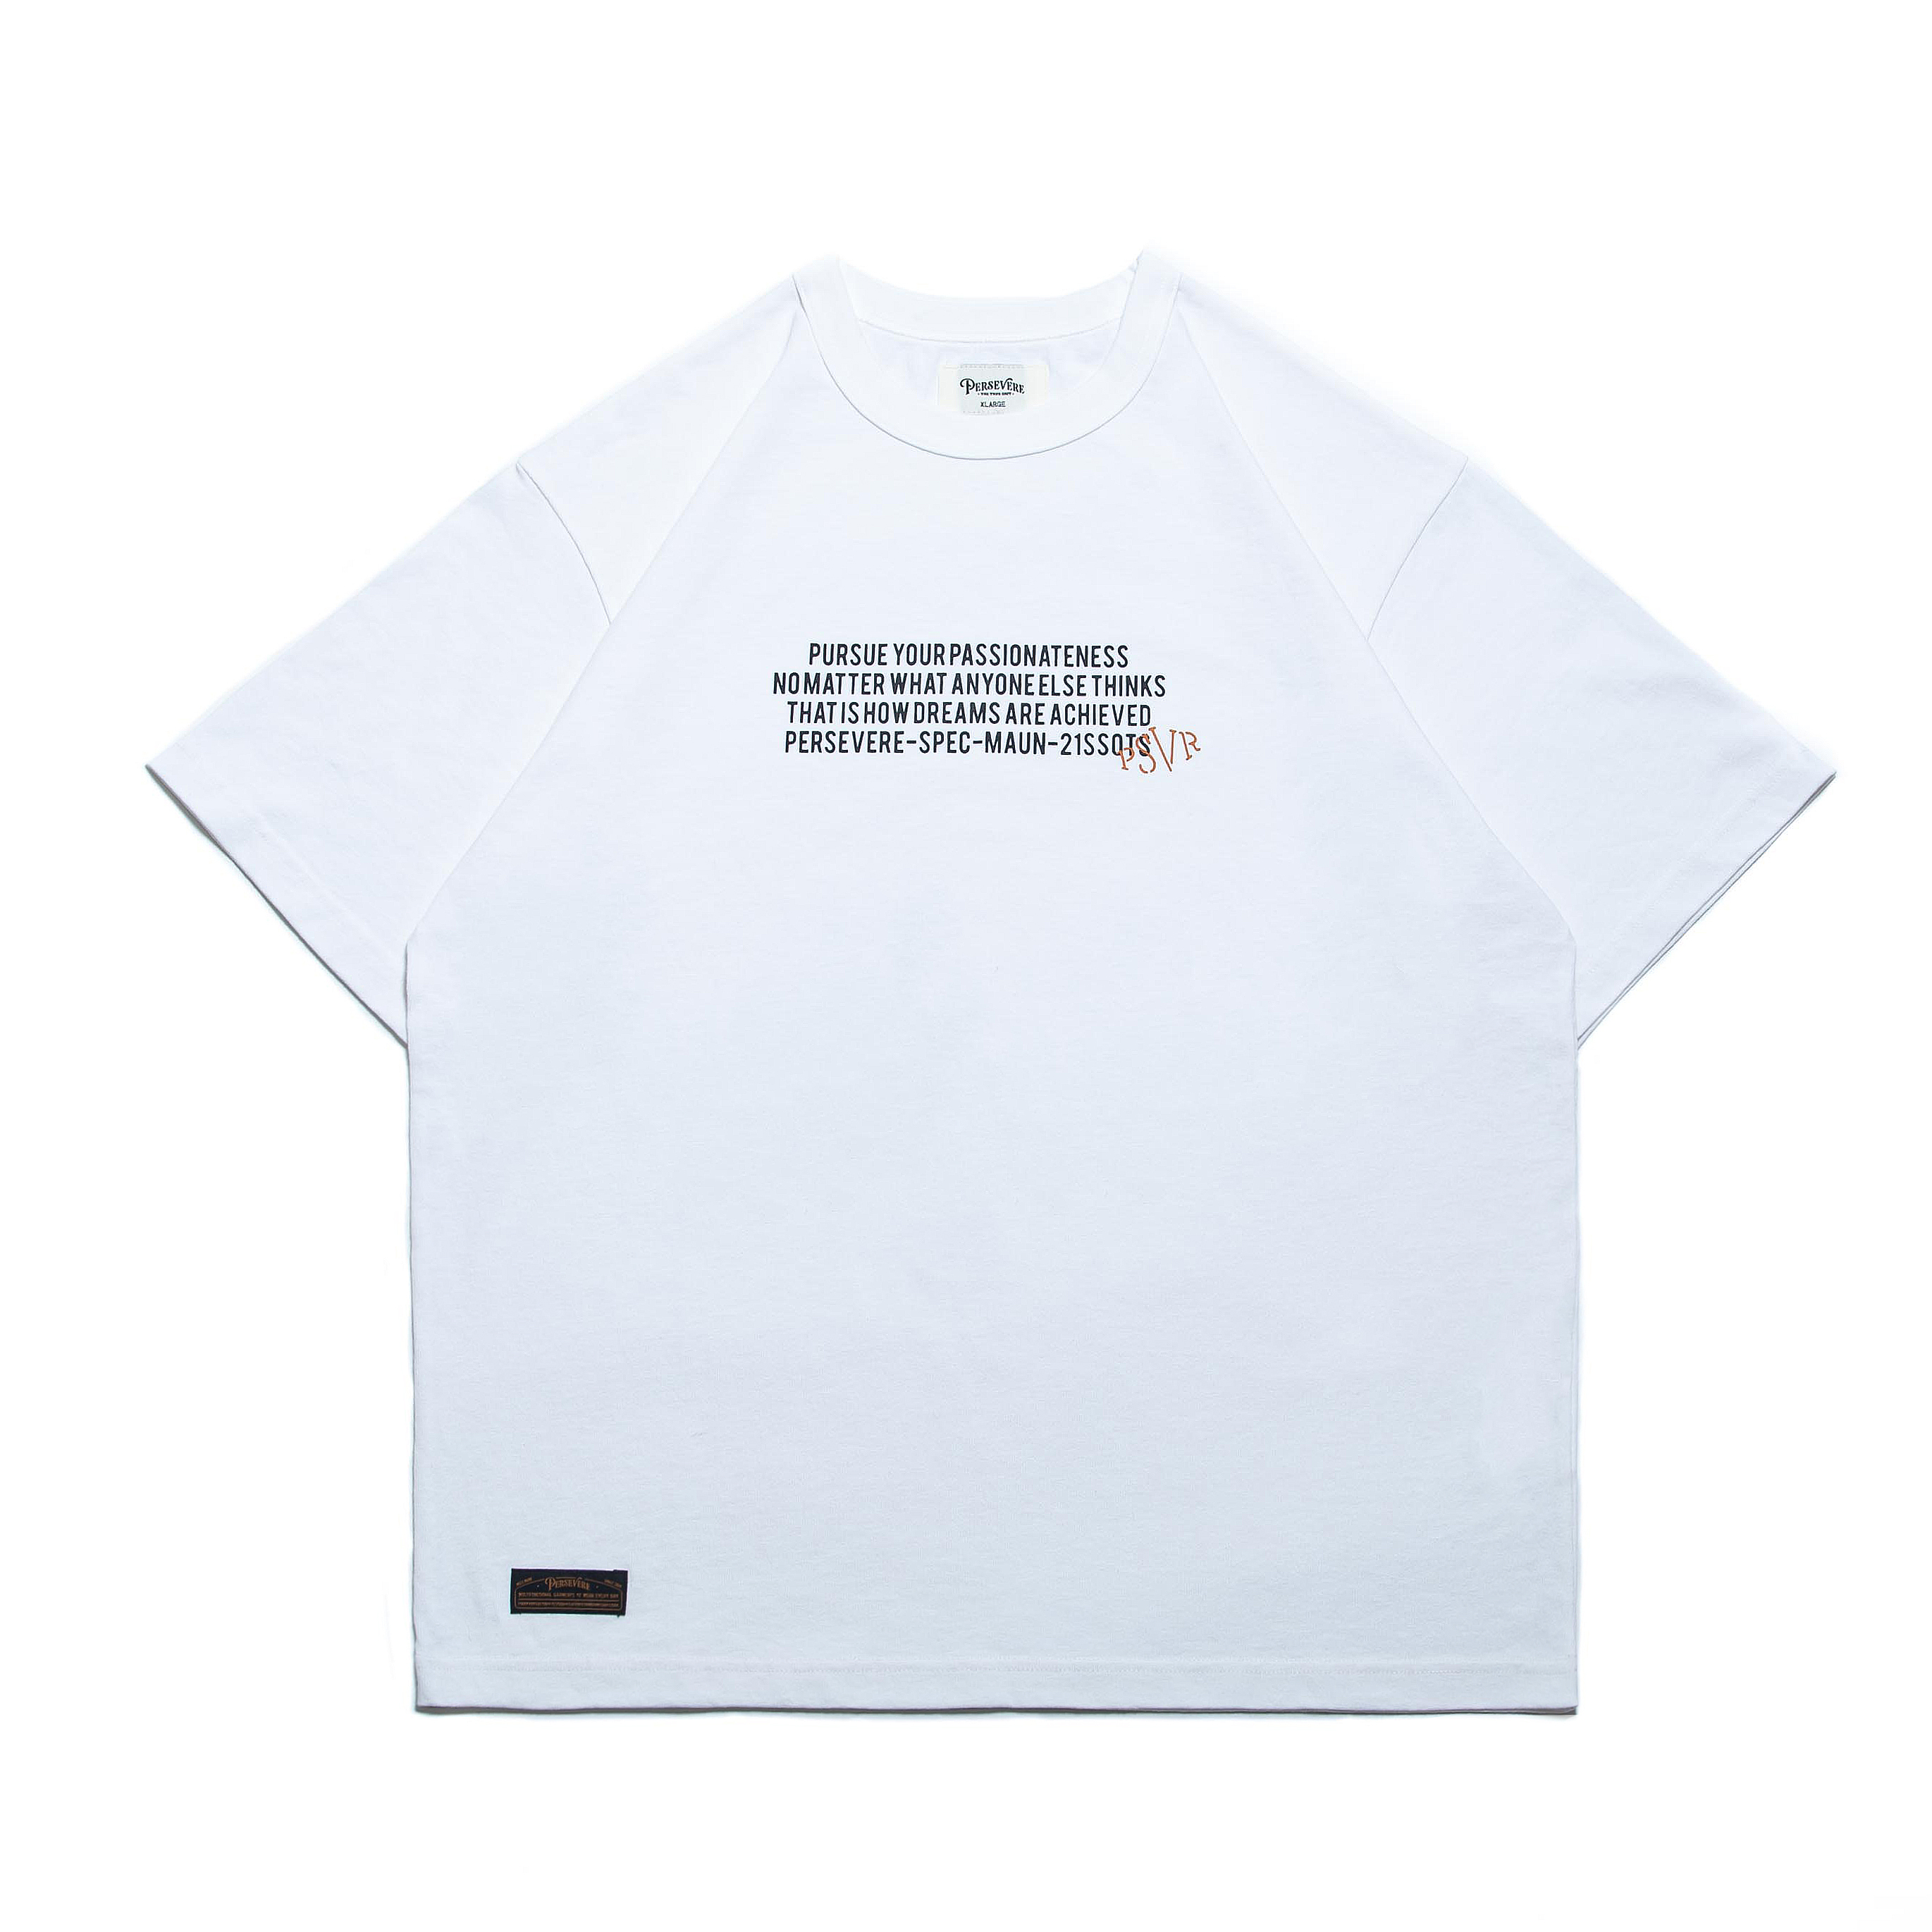 PERSEVERE MOTTO PATTERN T-SHIRT - WHITE